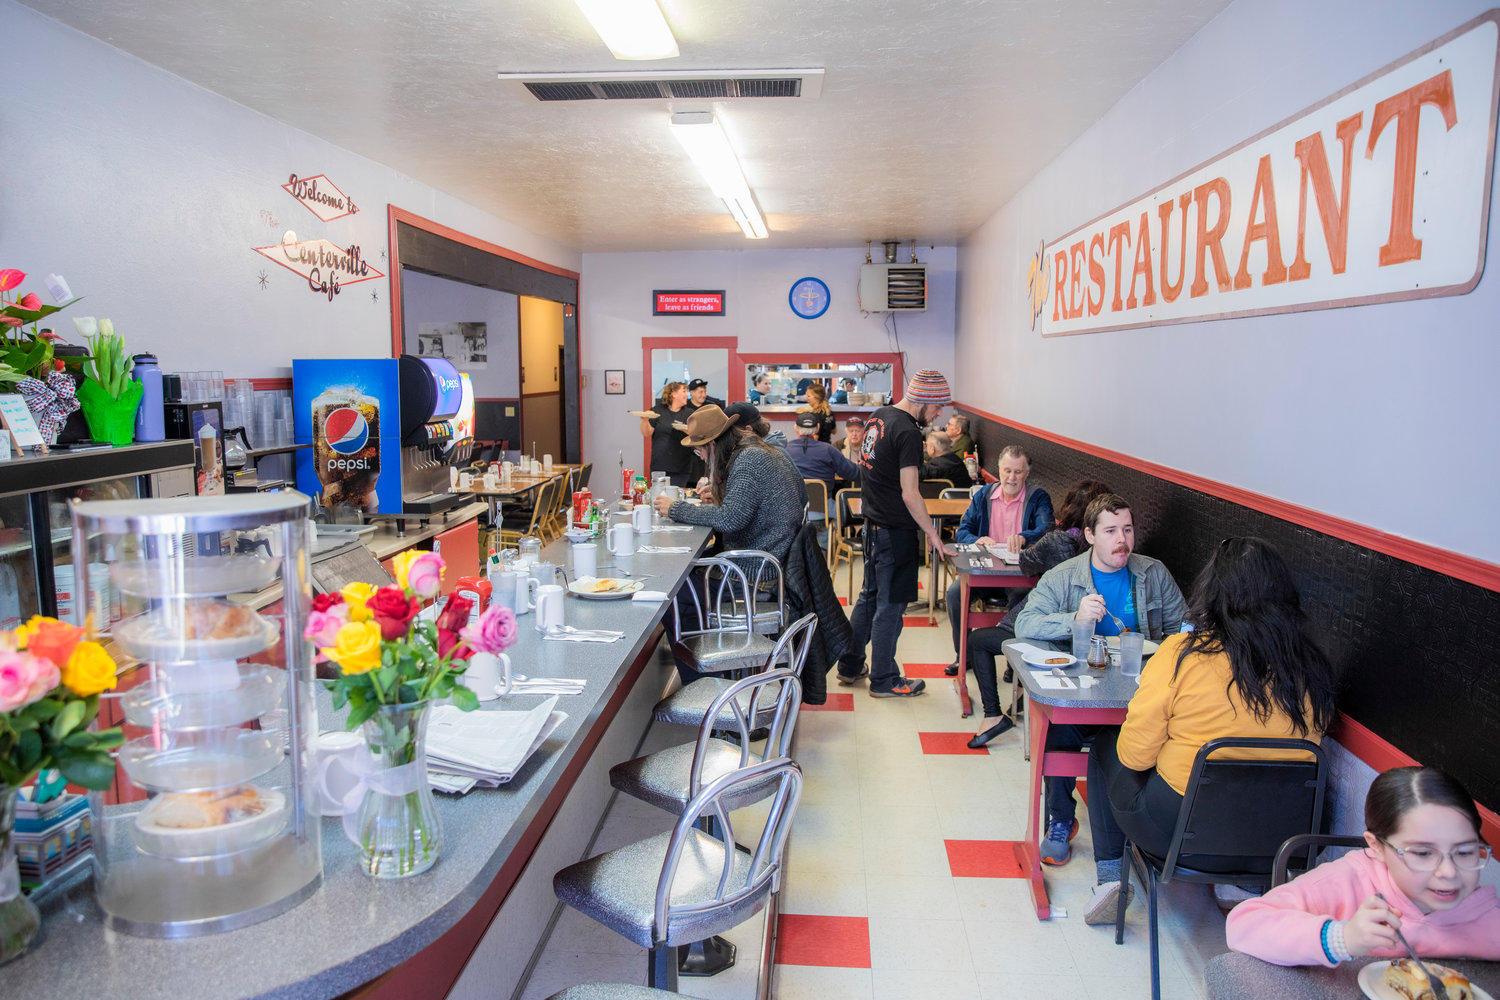 Visitors dine inside The Centerville Cafe in Centralia on Wednesday during a ribbon cutting ceremony hosted by the Centralia-Chehalis Chamber of Commerce.